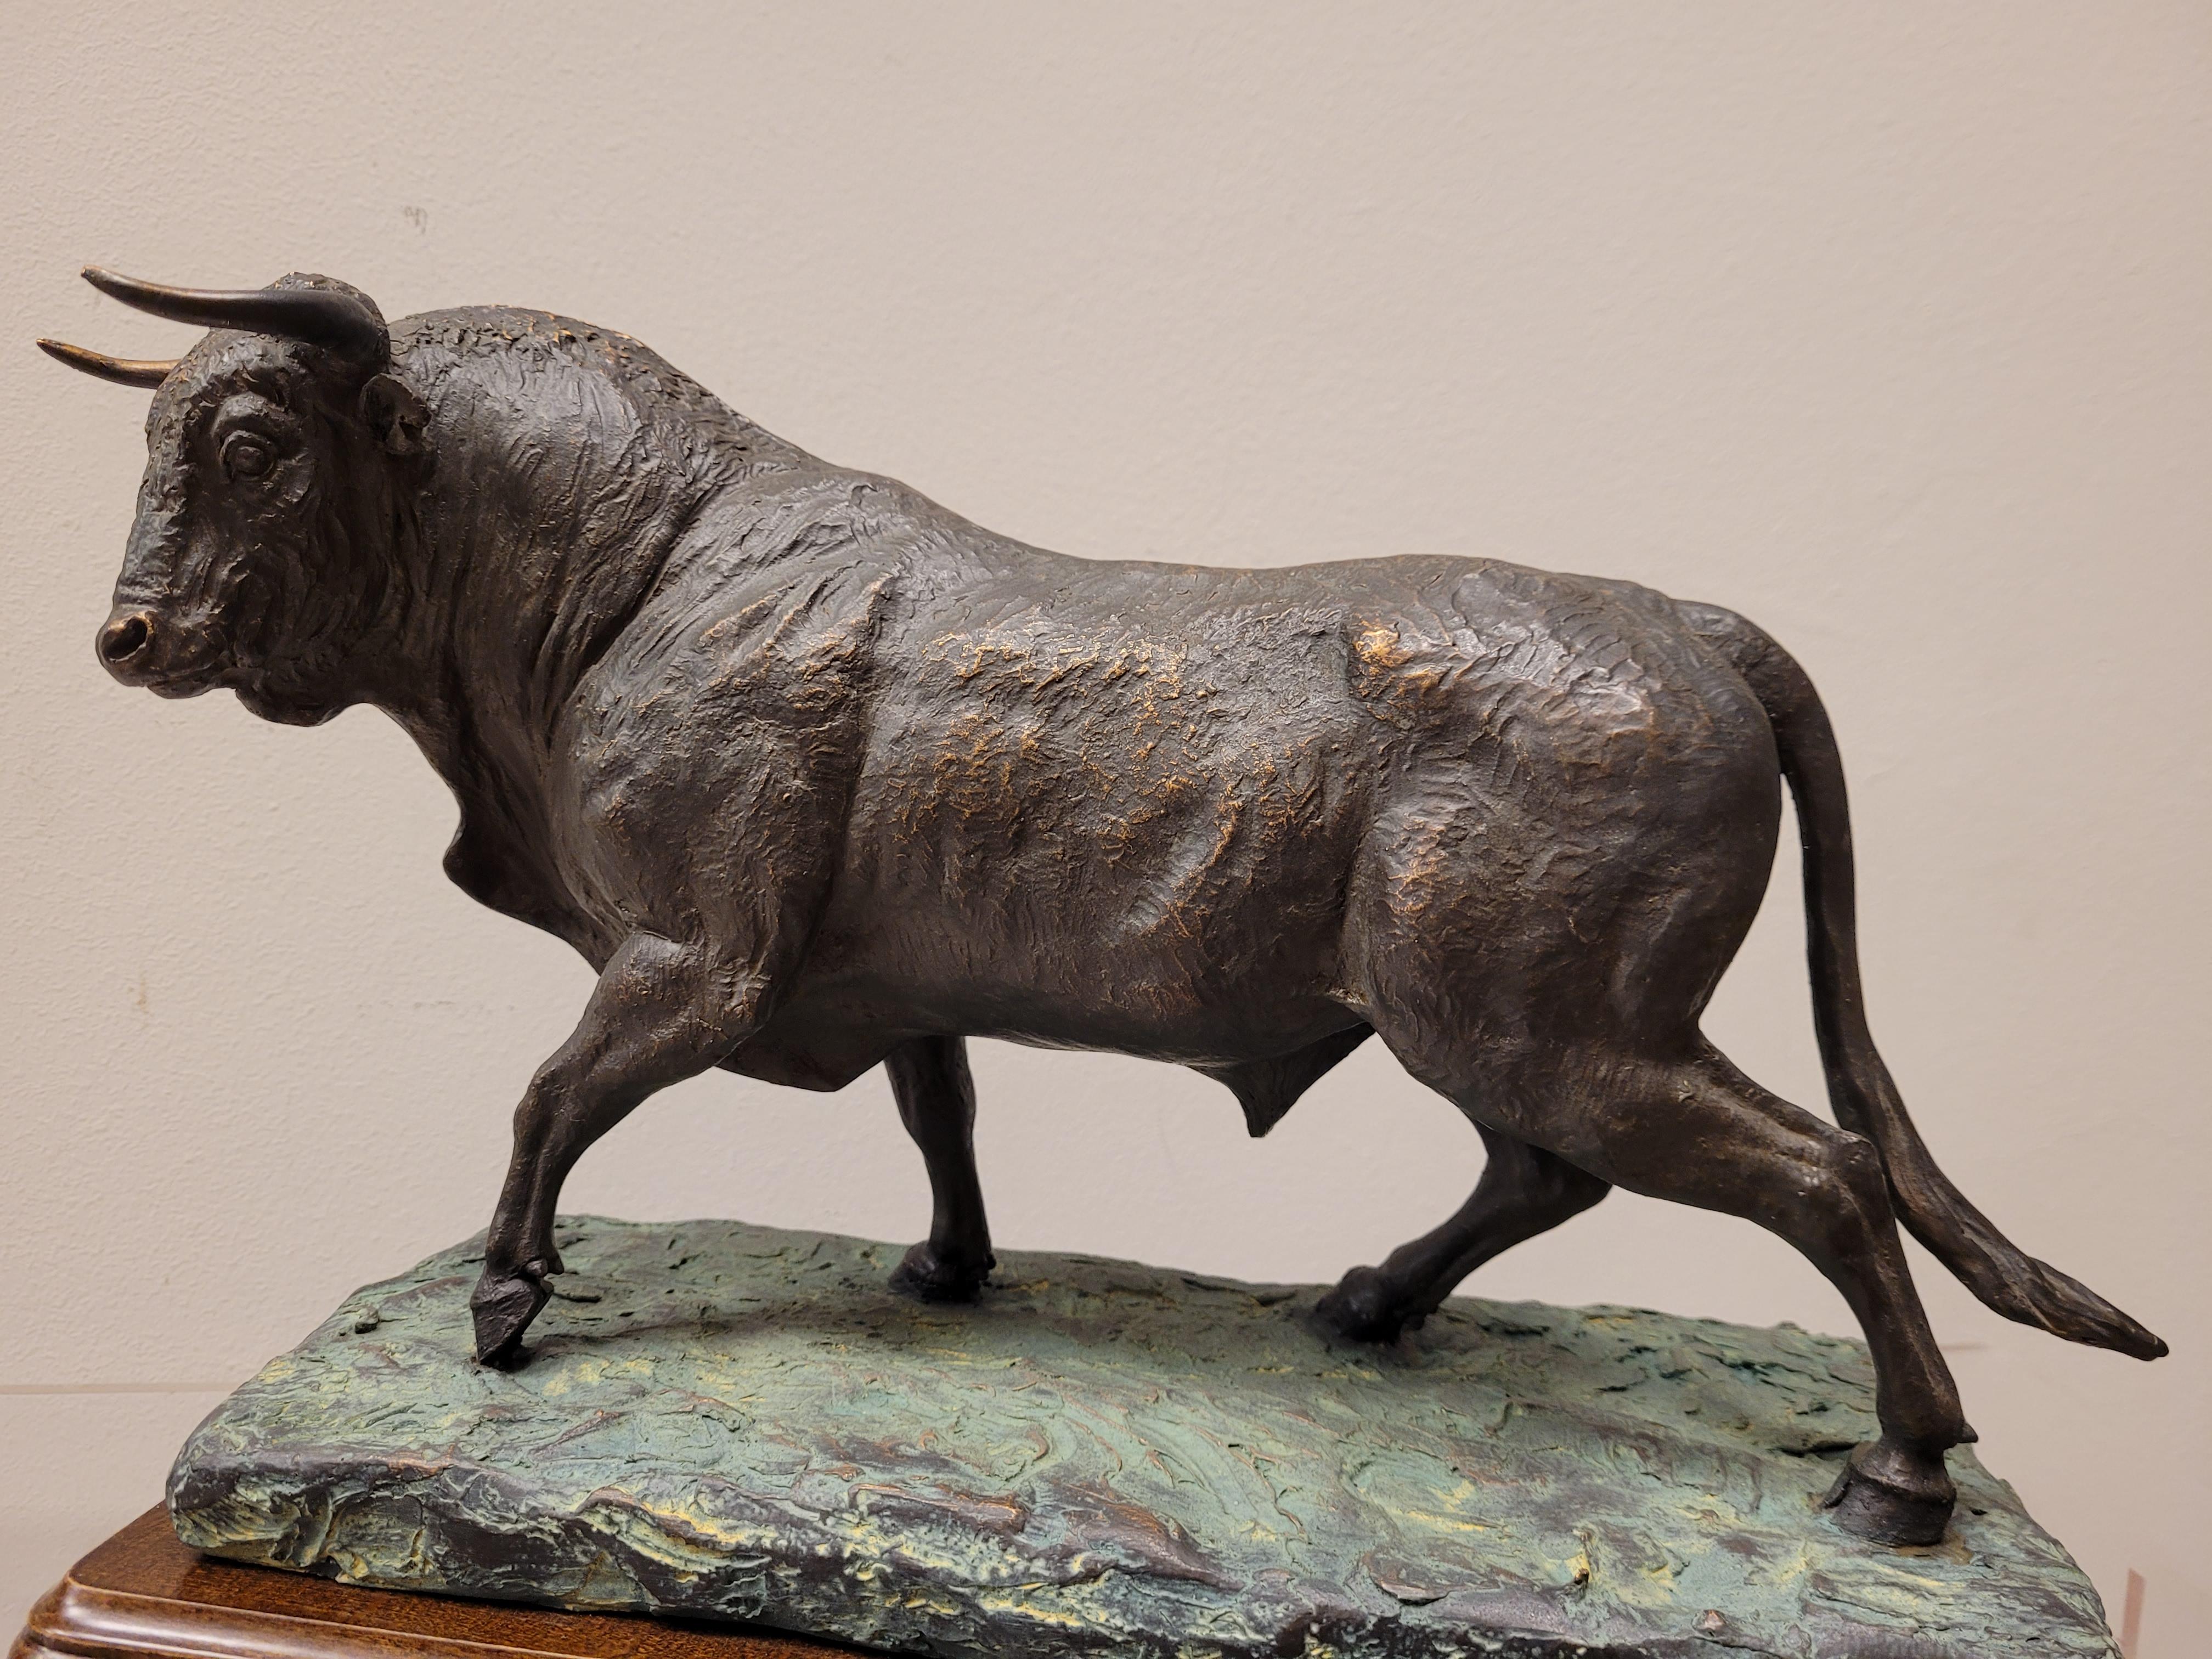 Hand-Crafted 20th Spanish Bull Sculpture Bronze by Peralta Signed